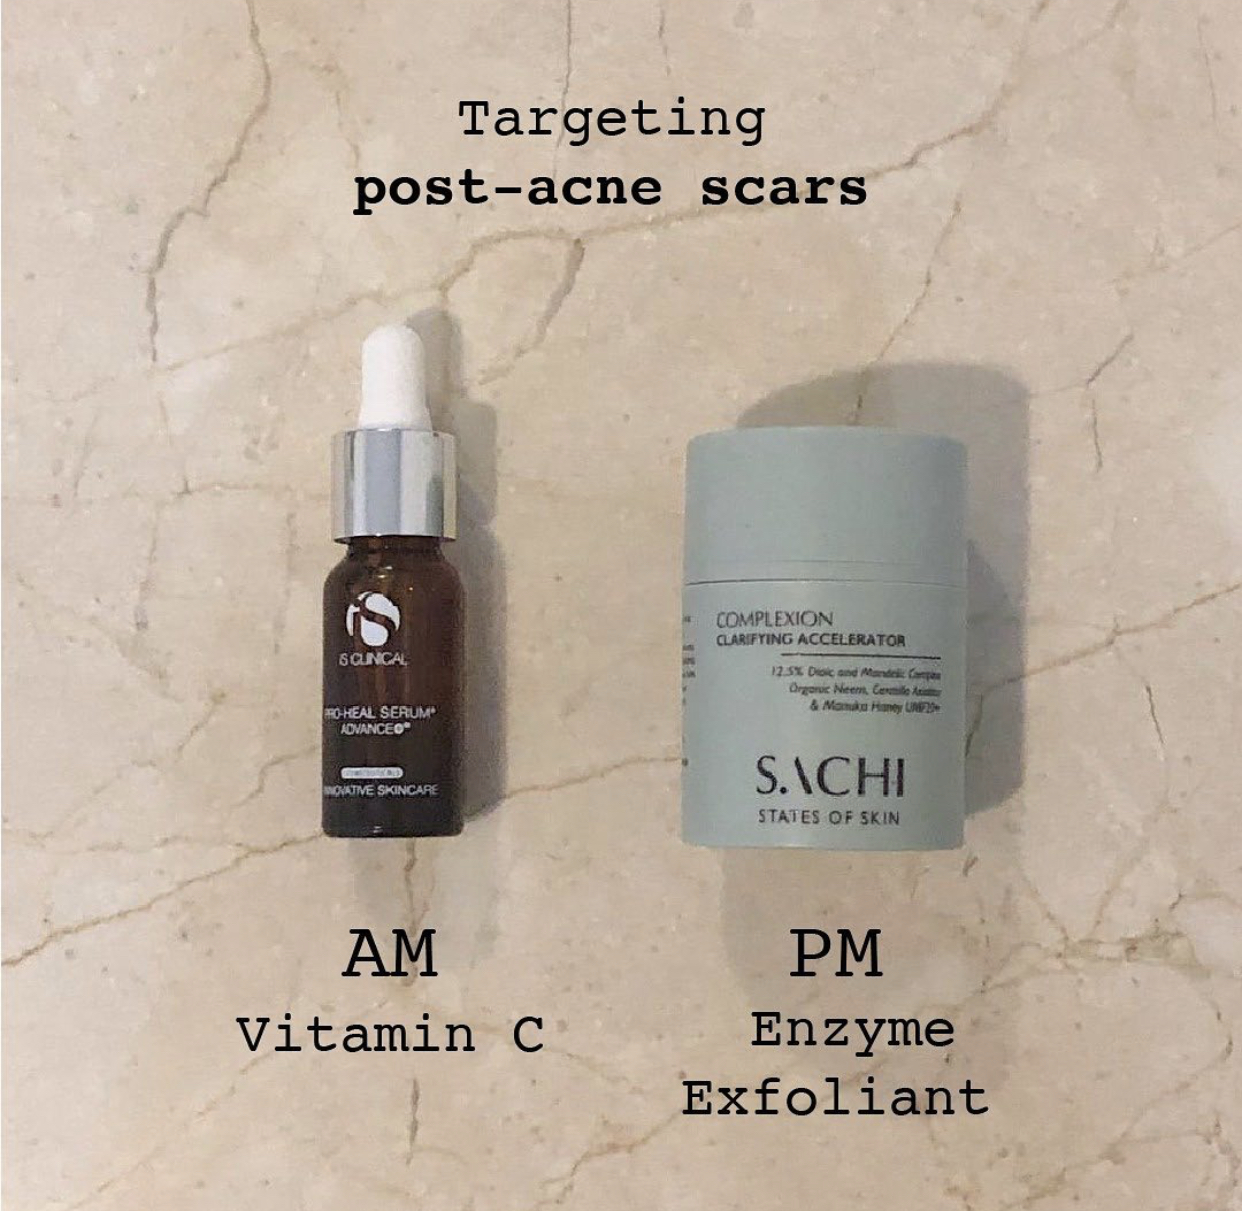 Product review: isclinical’s Pro Heal and Sachi Skin’s Complexion Clarifying Accelerator